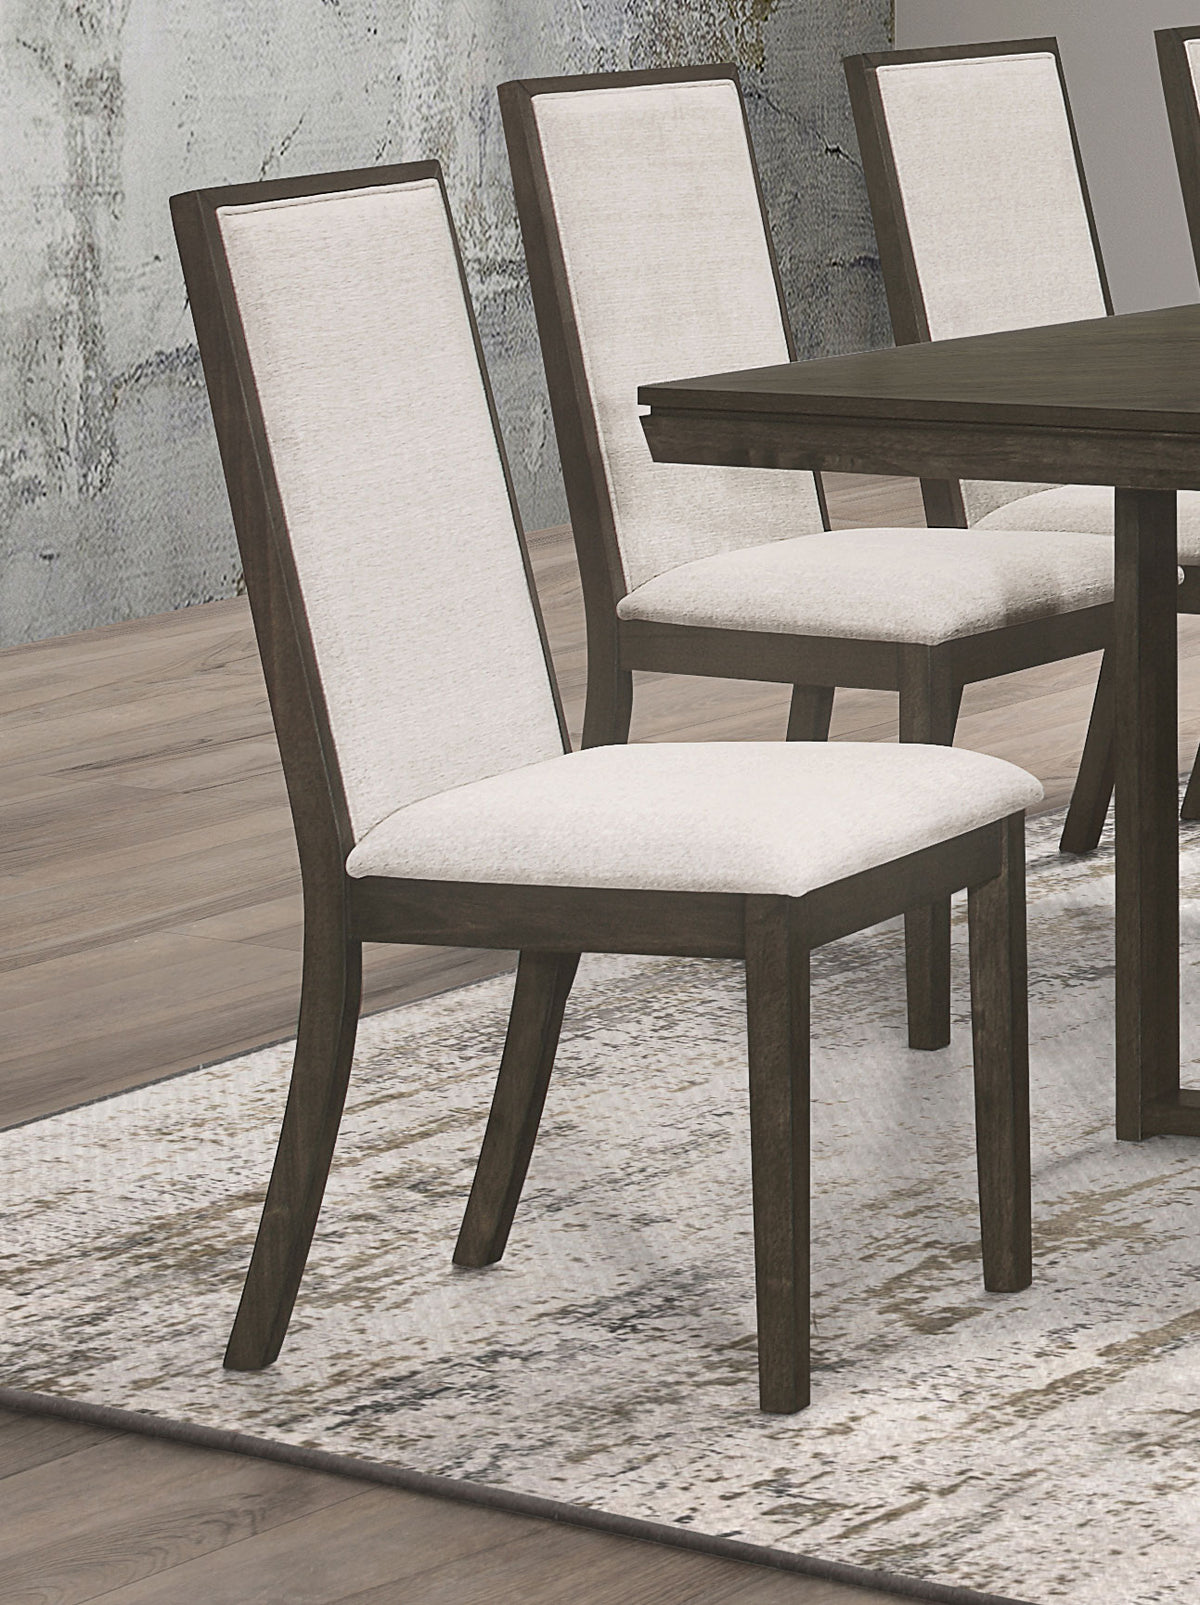 Kelly Upholstered Solid Back Dining Side Chair Beige and Dark Grey (Set of 2) Kelly Upholstered Solid Back Dining Side Chair Beige and Dark Grey (Set of 2) Half Price Furniture